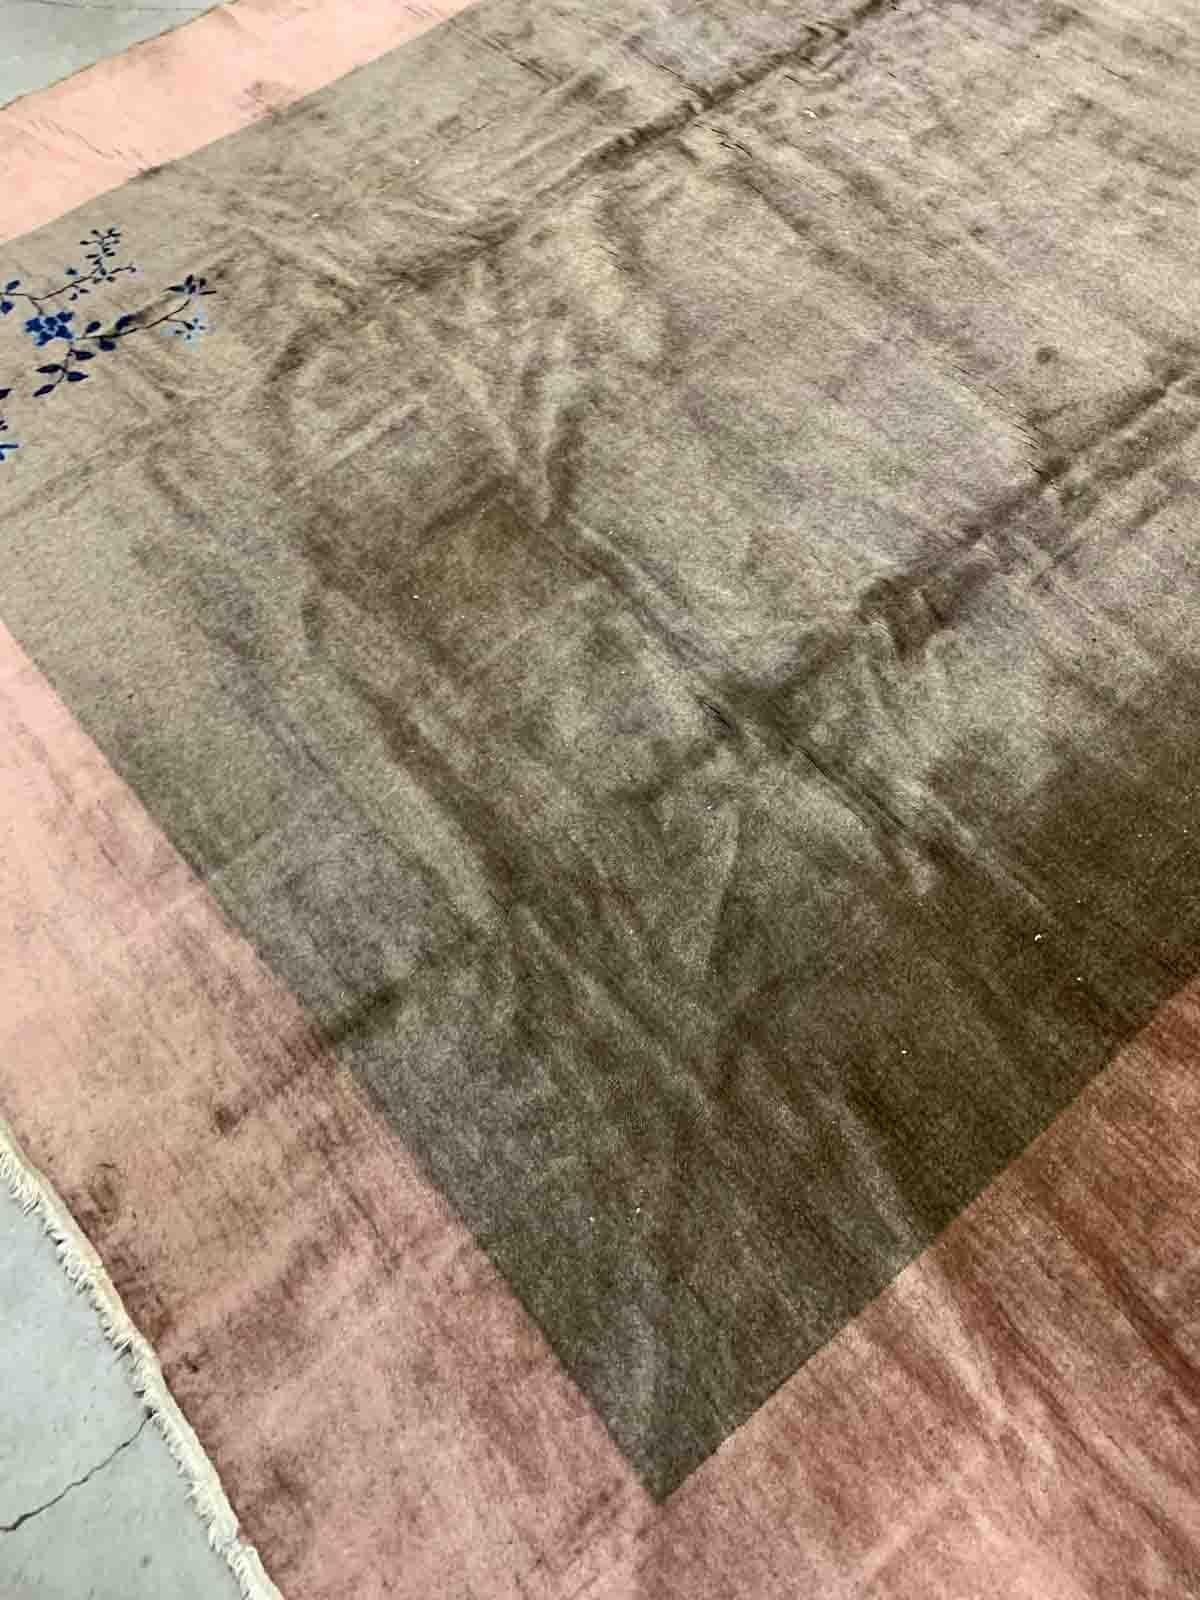 Handmade antique Art Deco Chinese rug in olive green and peach shades. The rug is from the beginning of 20th century in original condition, it has some low pile. 

-condition: original, some low pile,

-circa: 1920s,

-size: 8.10' x 11.6'